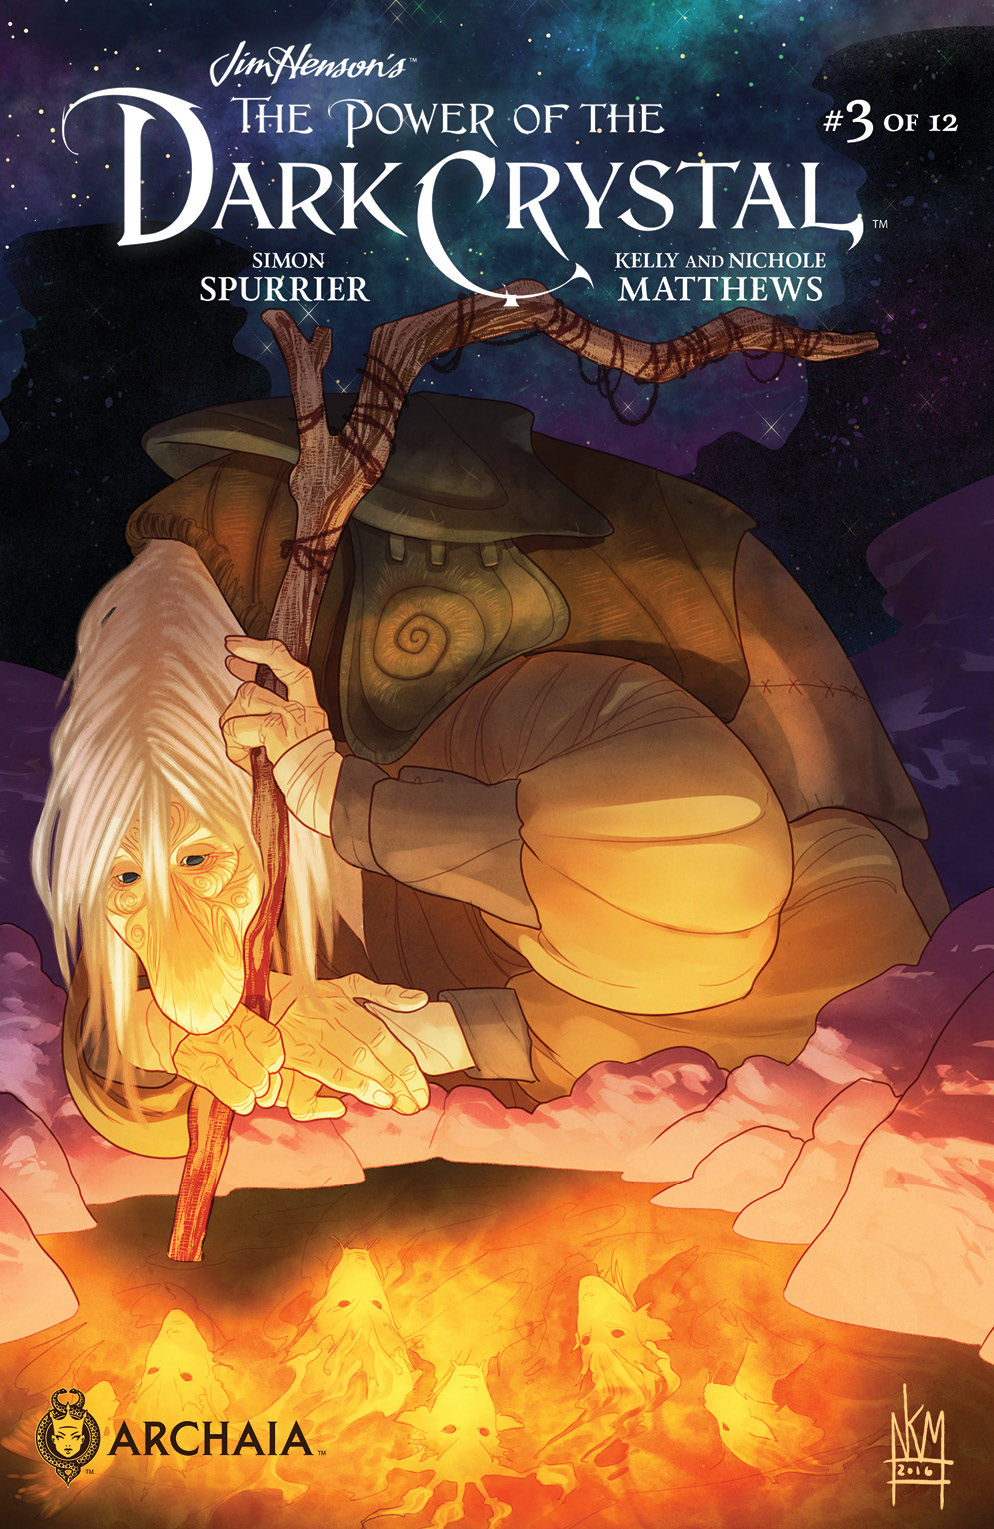 The Power of the Dark Crystal #3 Review